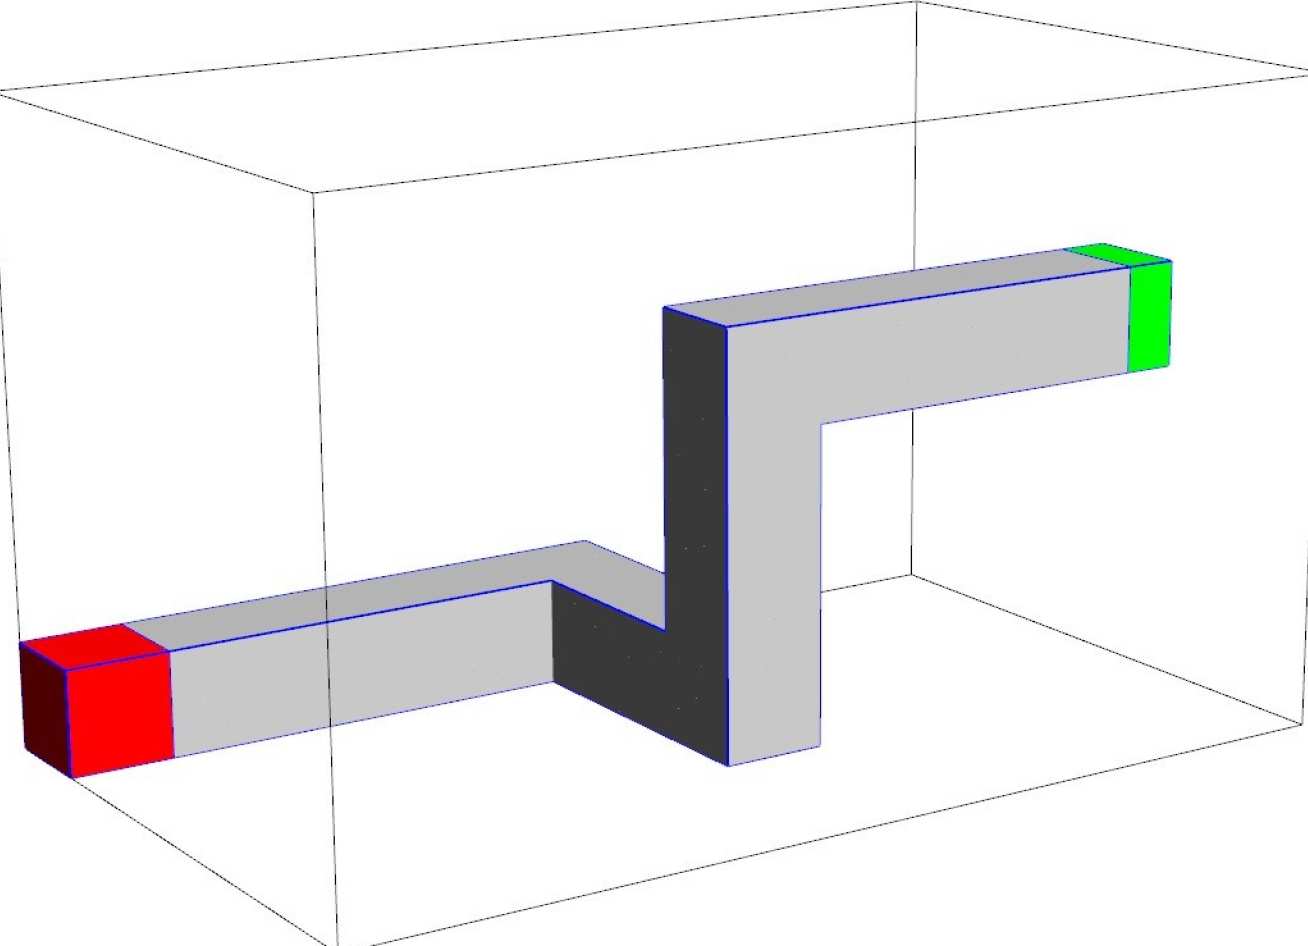 Geometry for a 3D dogleg problem. The duct region is transparent, surrounding by a heavy scattering region, with the bulk a heavy absorber. Red region is source, average flux in green region is goal.